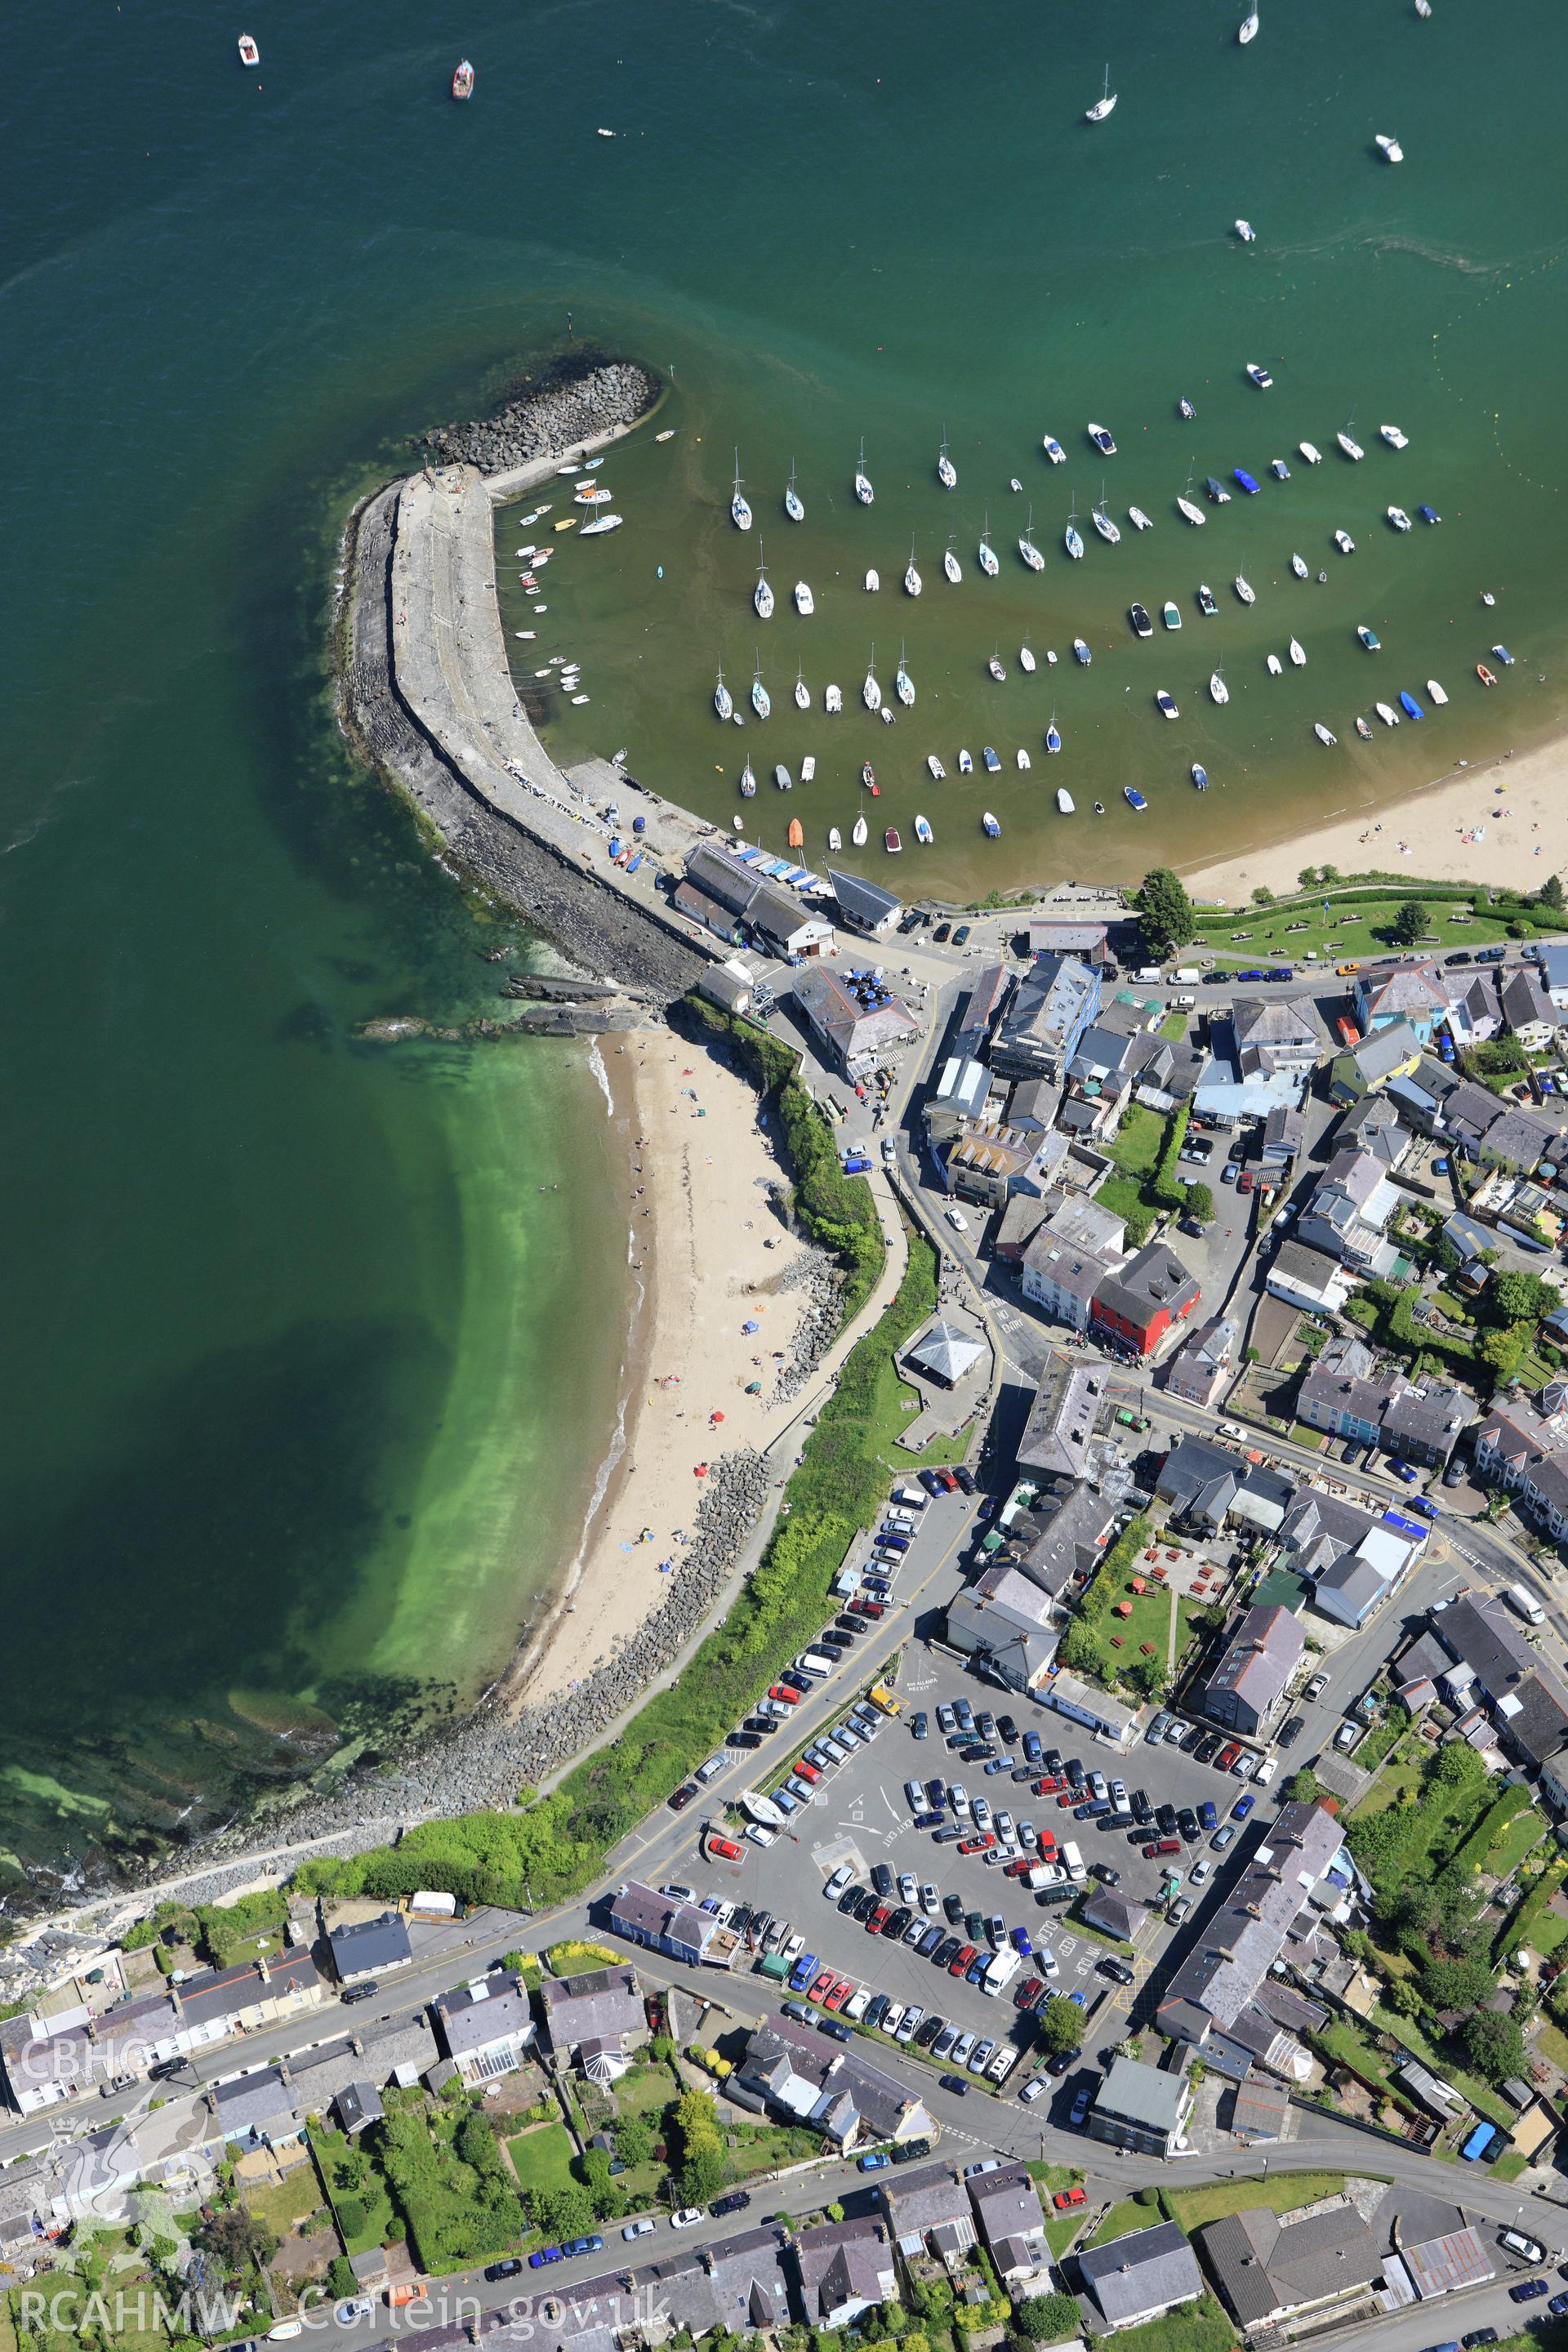 RCAHMW colour oblique aerial photograph of New Quay. Taken on 01 June 2009 by Toby Driver